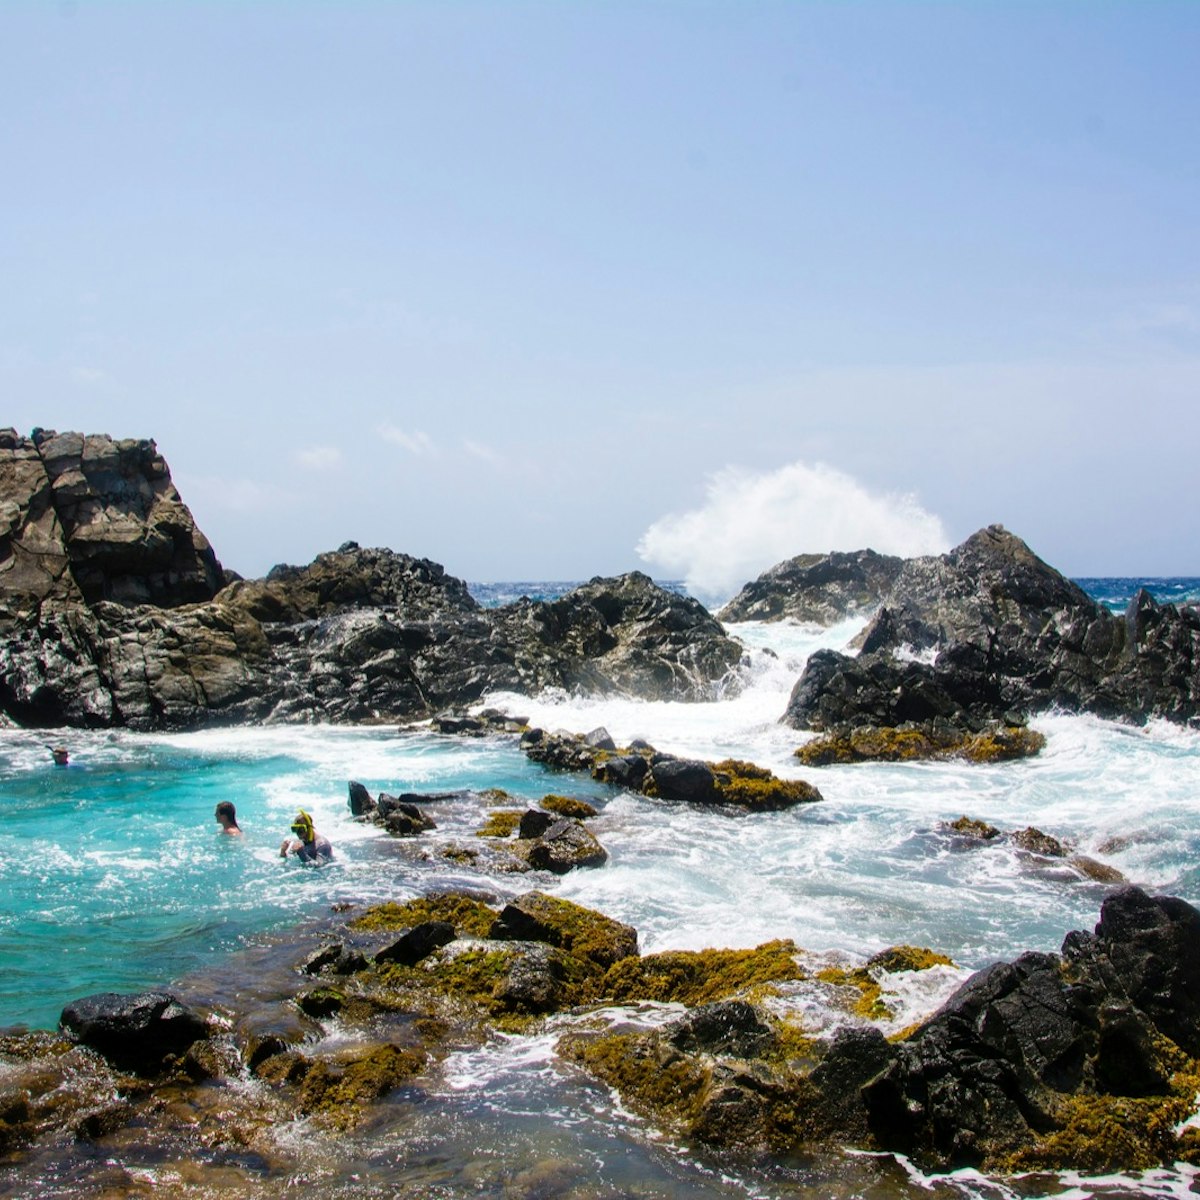 Natural Pool Santa Cruz Aruba; Shutterstock ID 1031342485; Your name (First / Last): William Broich; GL account no.: 65050; Netsuite department name: Online Editorial ; Full Product or Project name including edition: Aruba